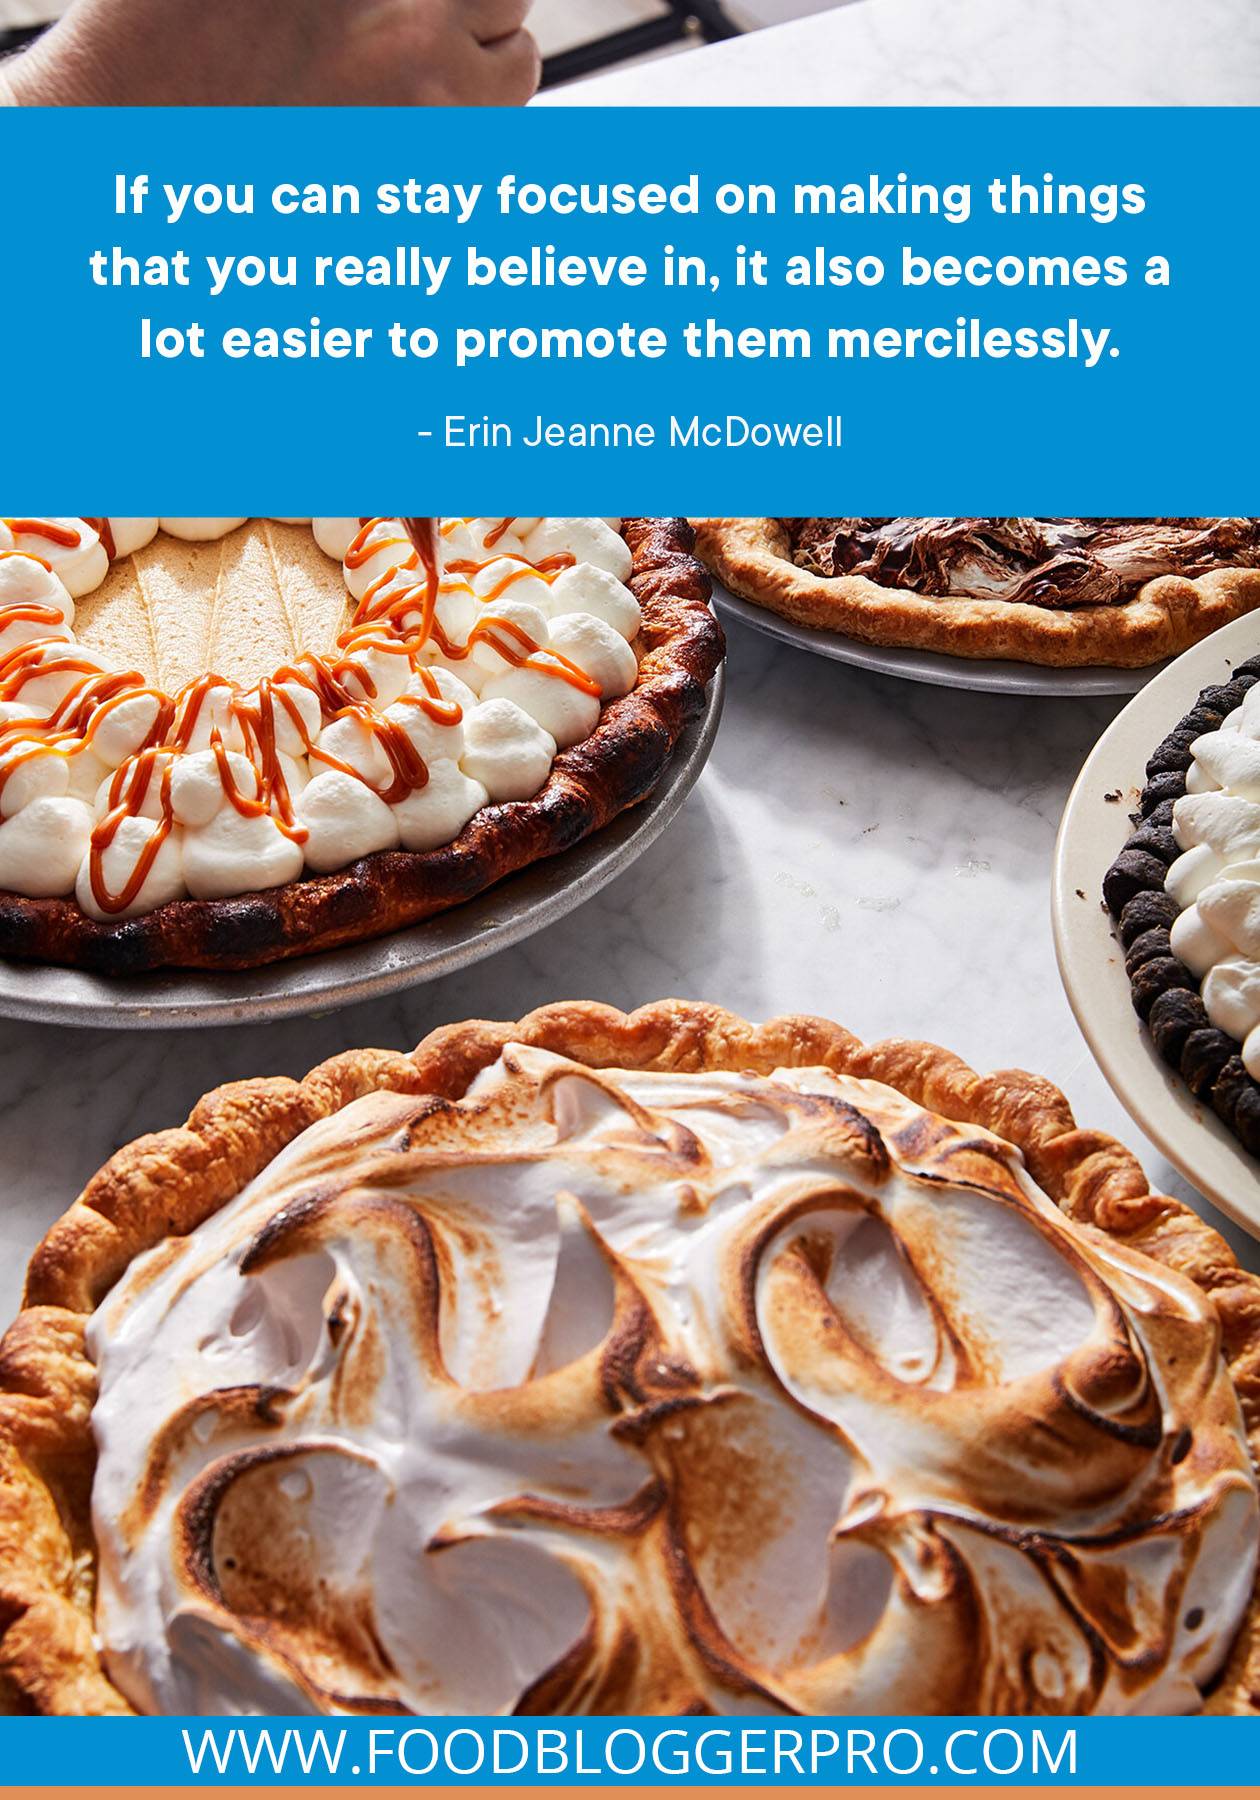 A photograph of pies with a quote from Erin Jeanne McDowell's episode of The Food Blogger Pro Podcast that reads, "If you can stay focused on making things that you really believe in, it also becomes a lot easier to promote them mercilessly."